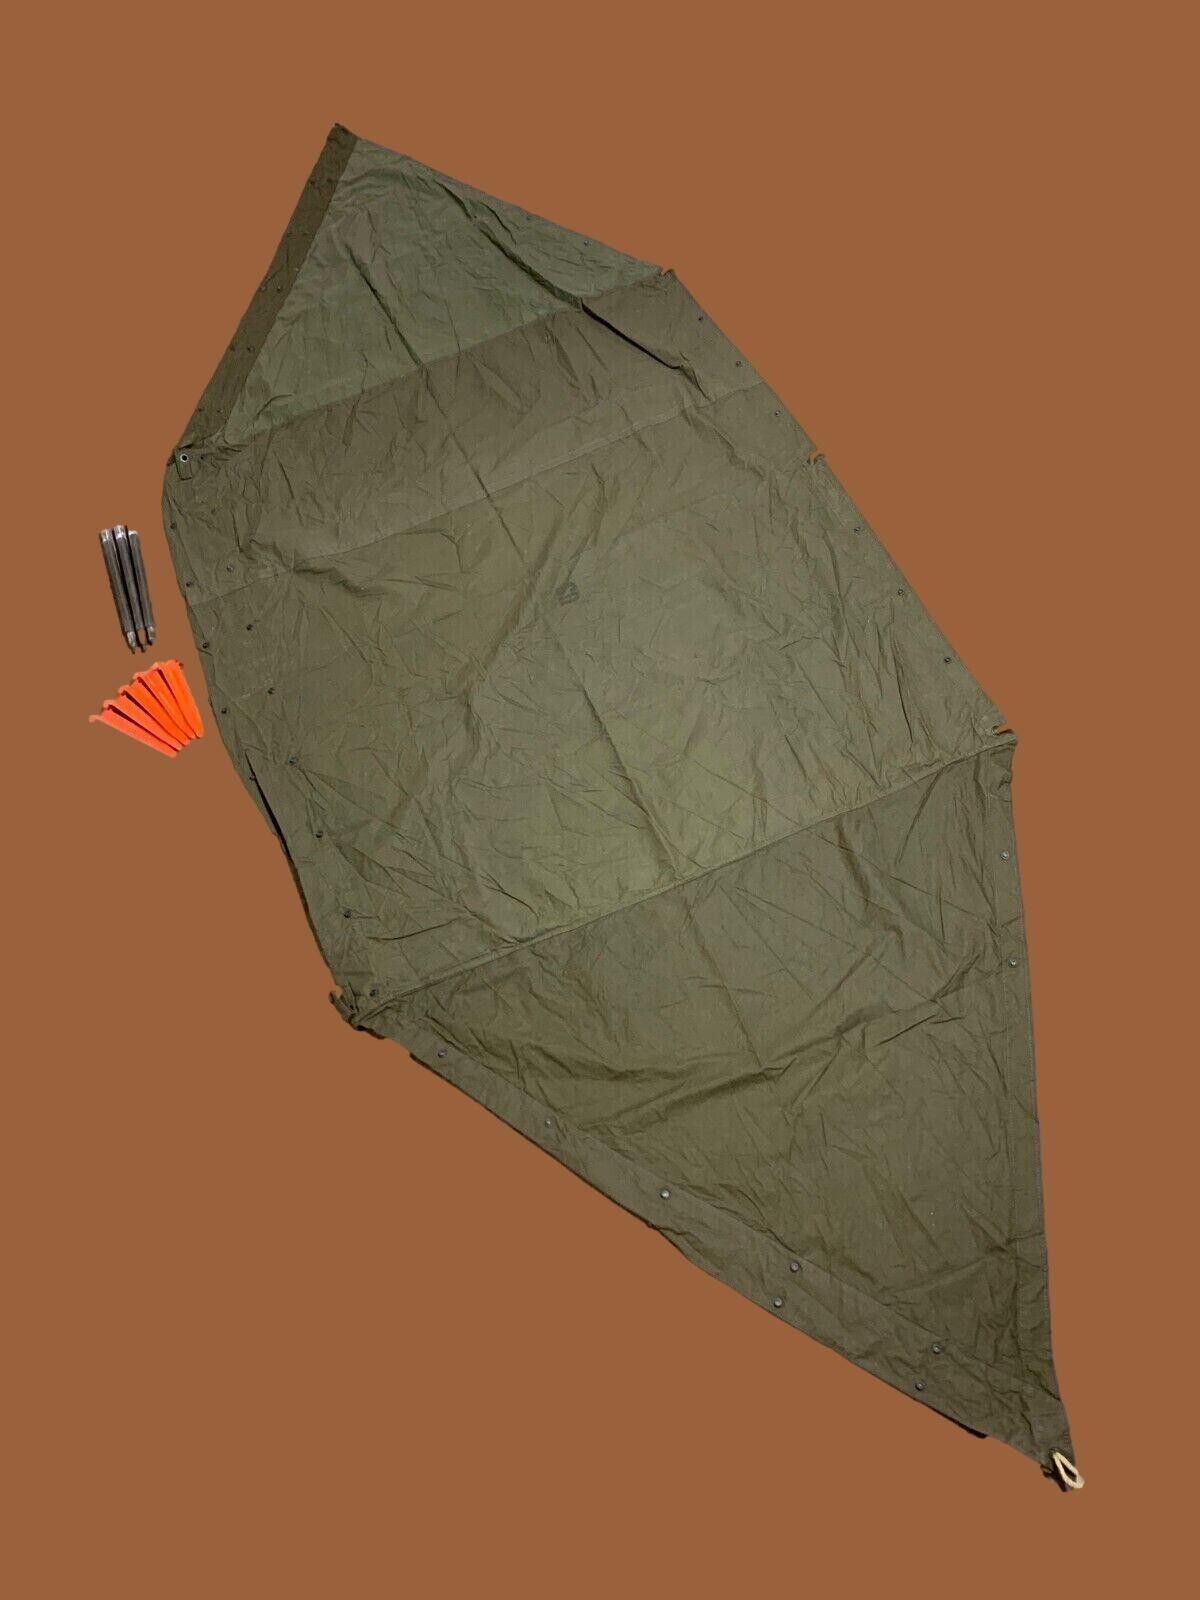 U.S ARMY SHELTER HALF PUP TENT 1/2 TENT NOS MILITARY SURPLUS NEW IN BOX